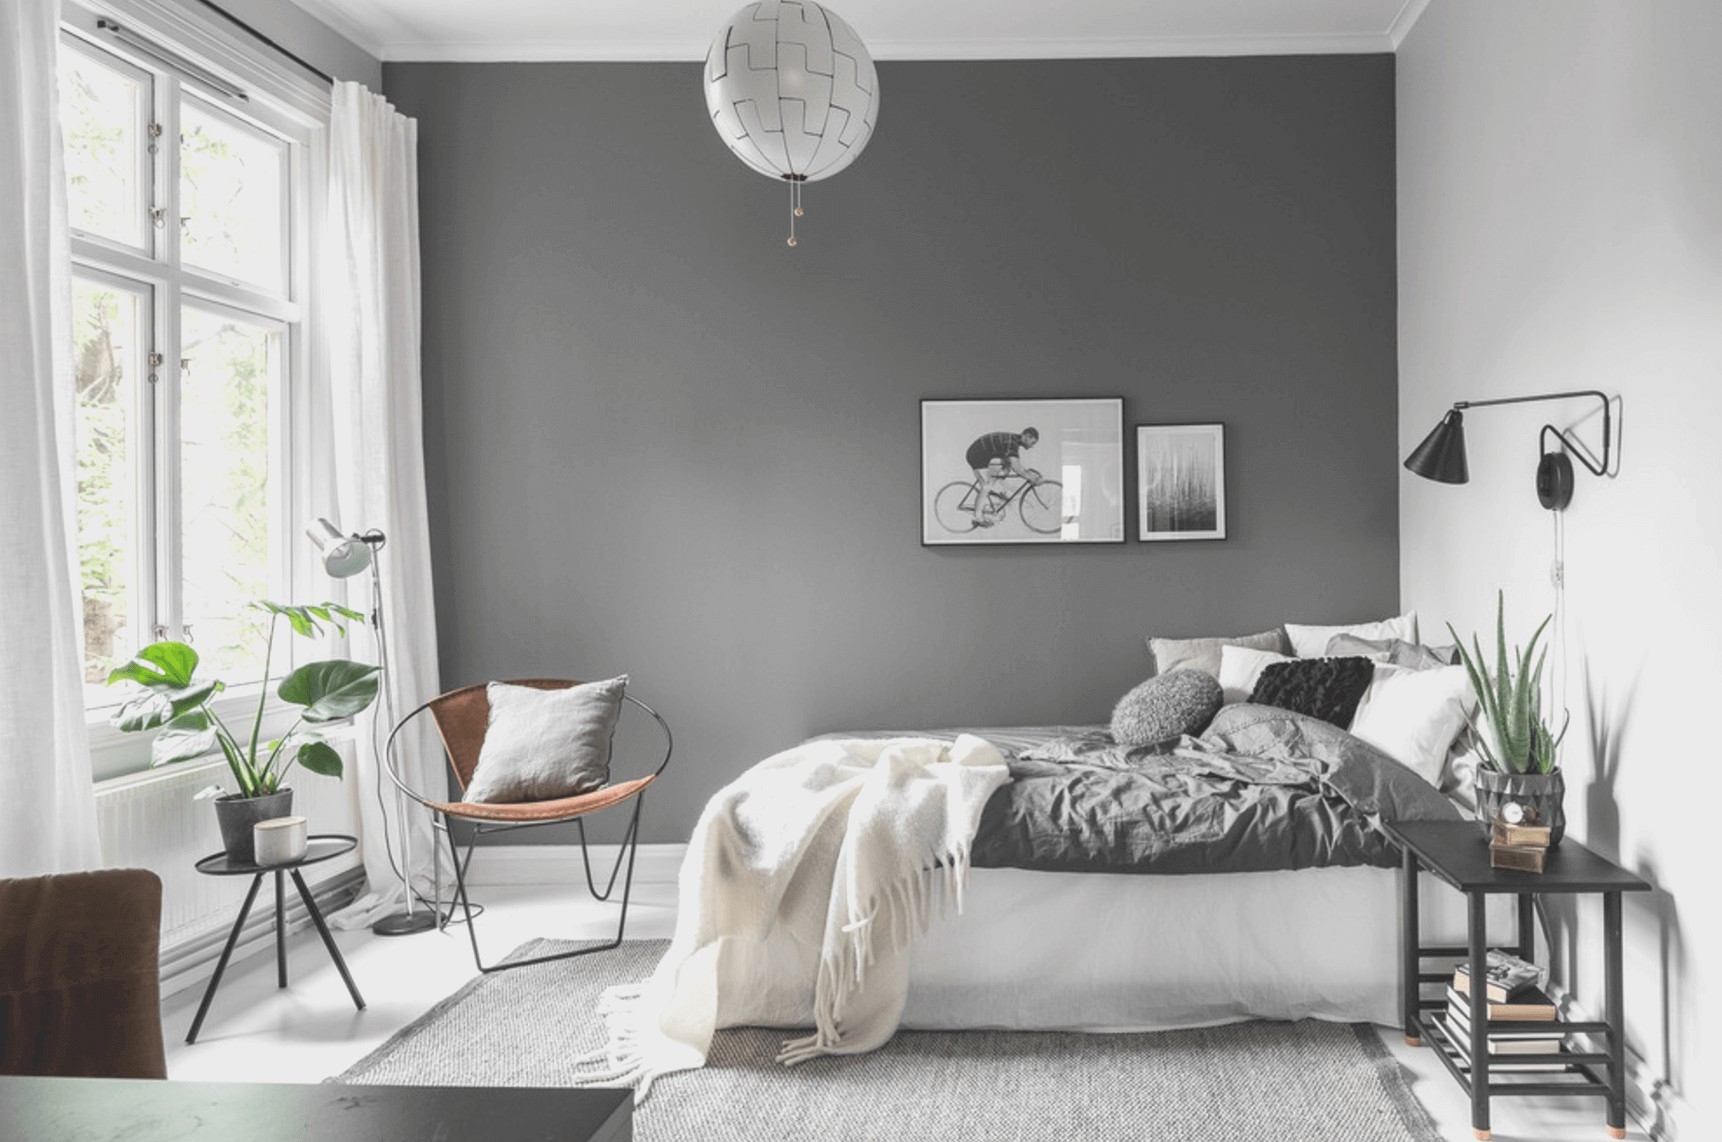 10 Amazing Grey And White Bedroom Ideas white and grey bedroom bedroom lakaysports white and grey 2023